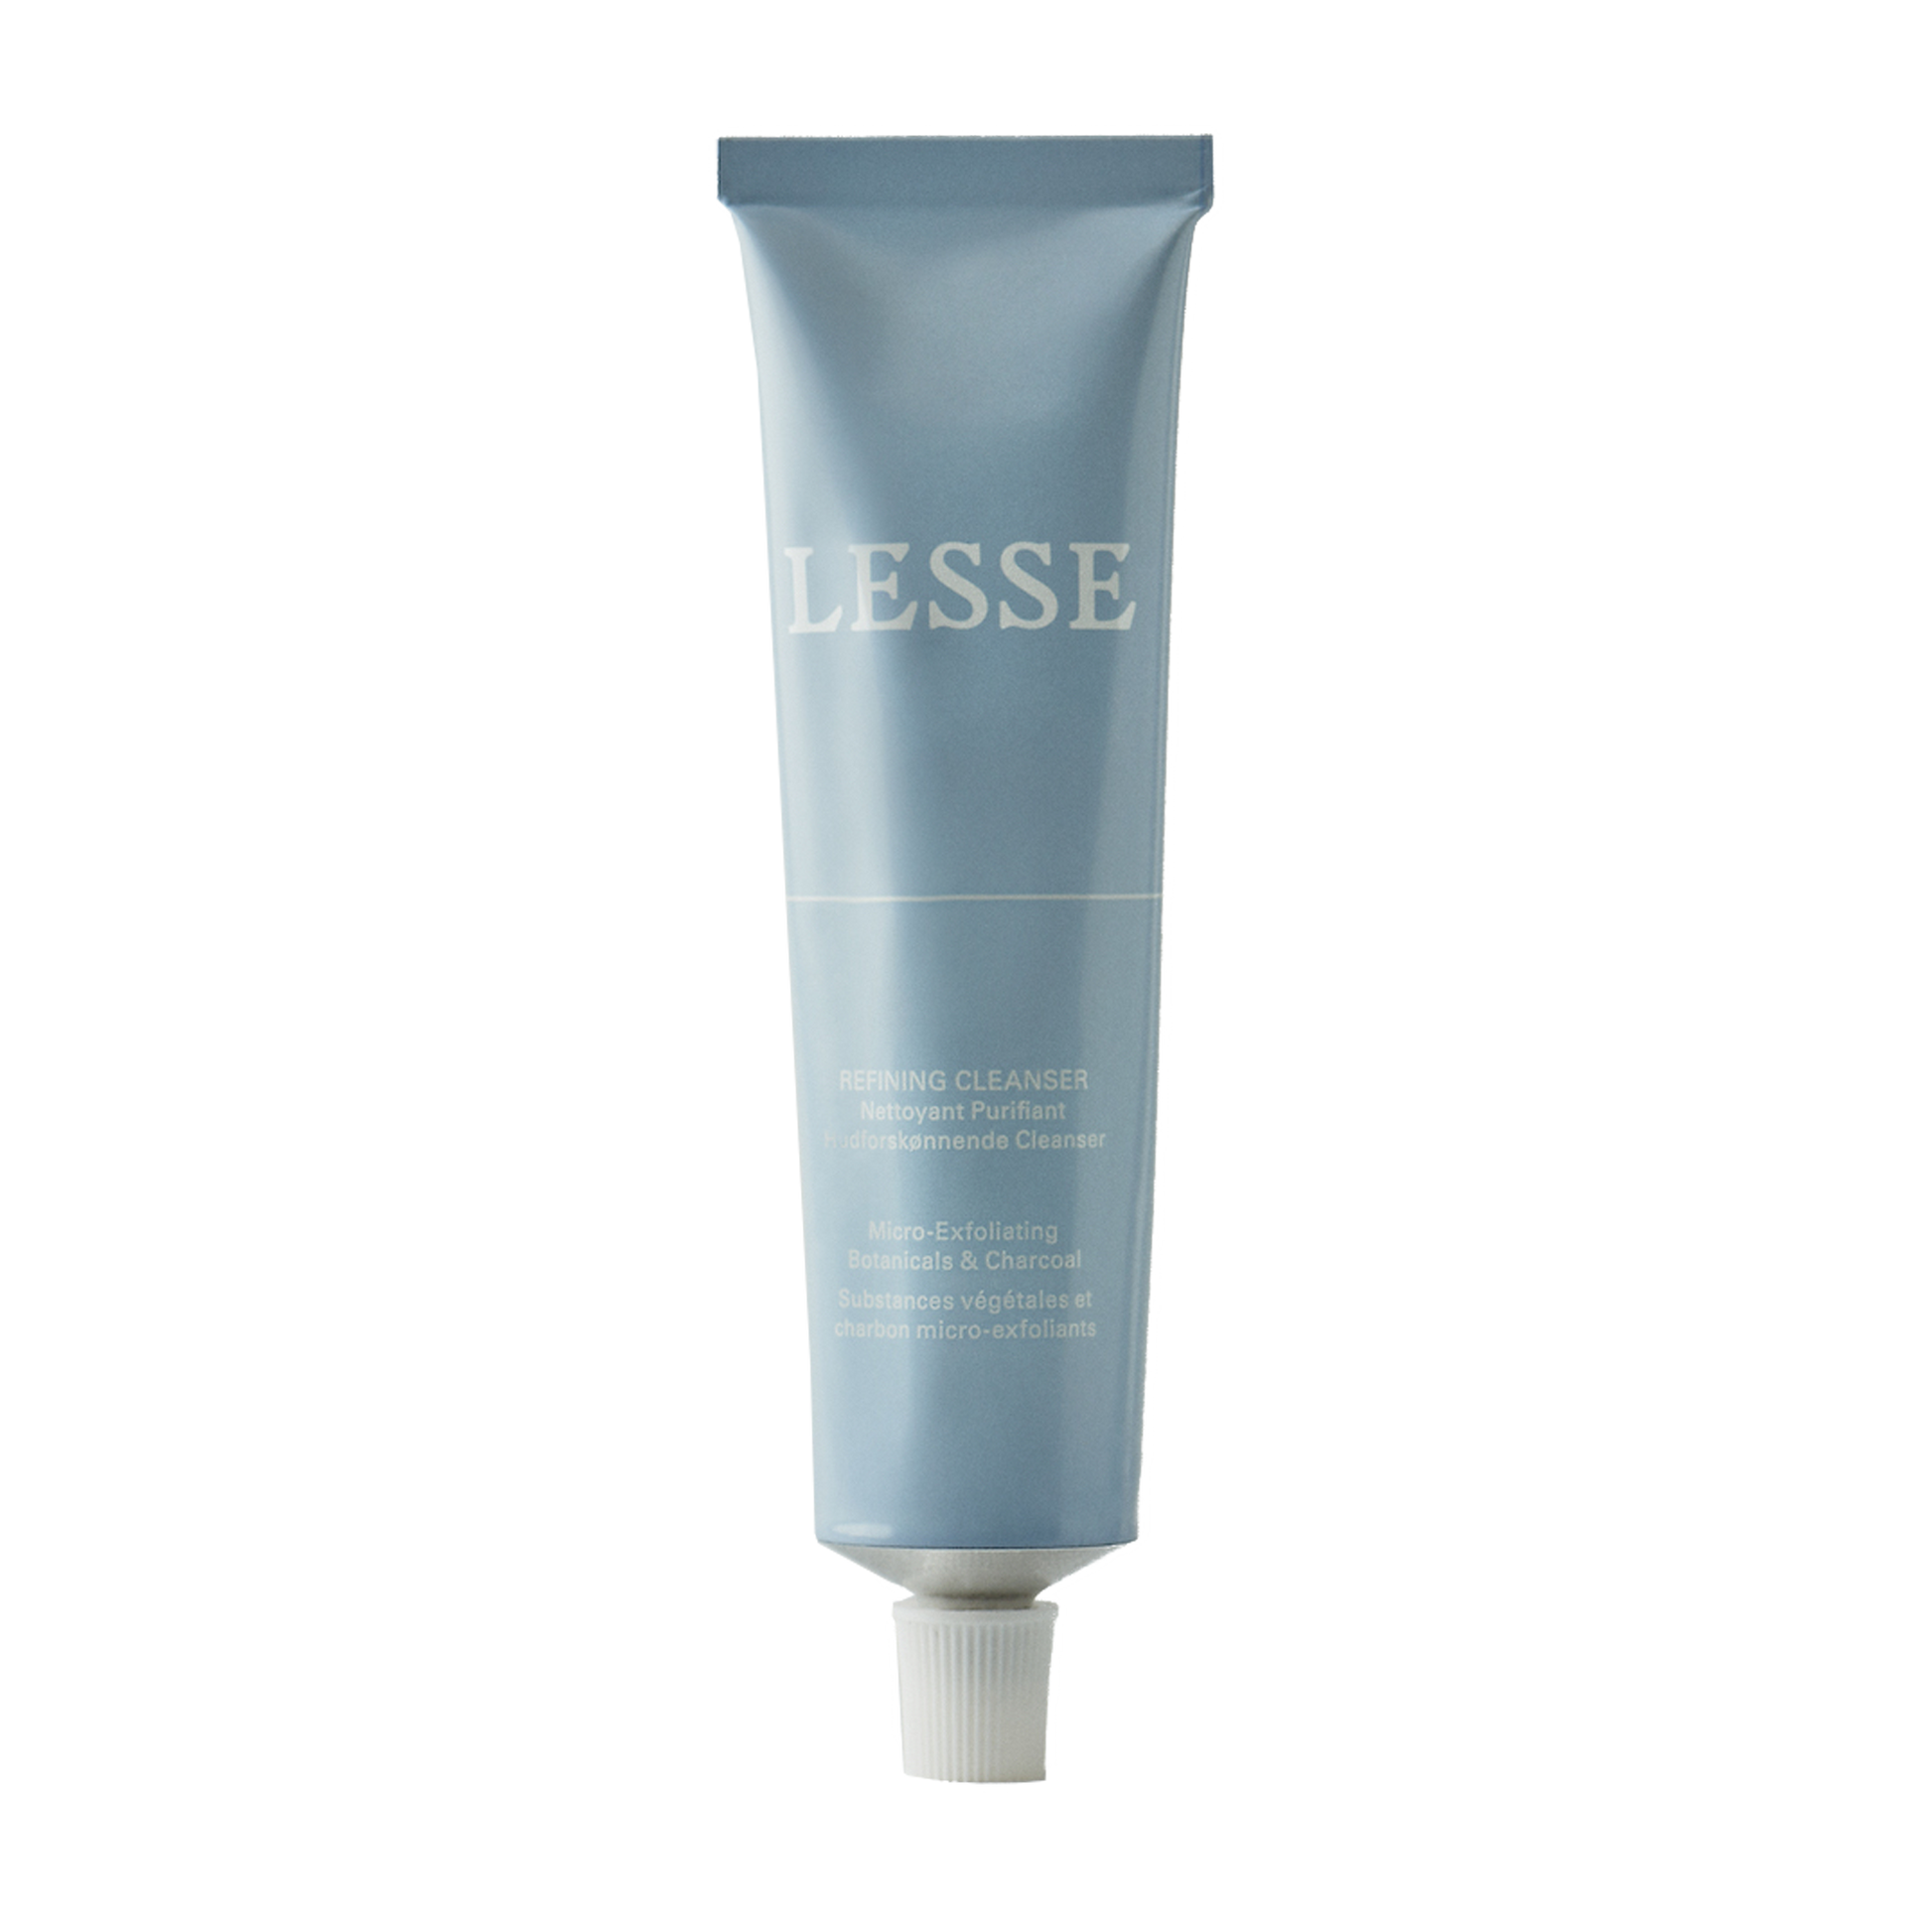 Refining Cleanser from LESSE